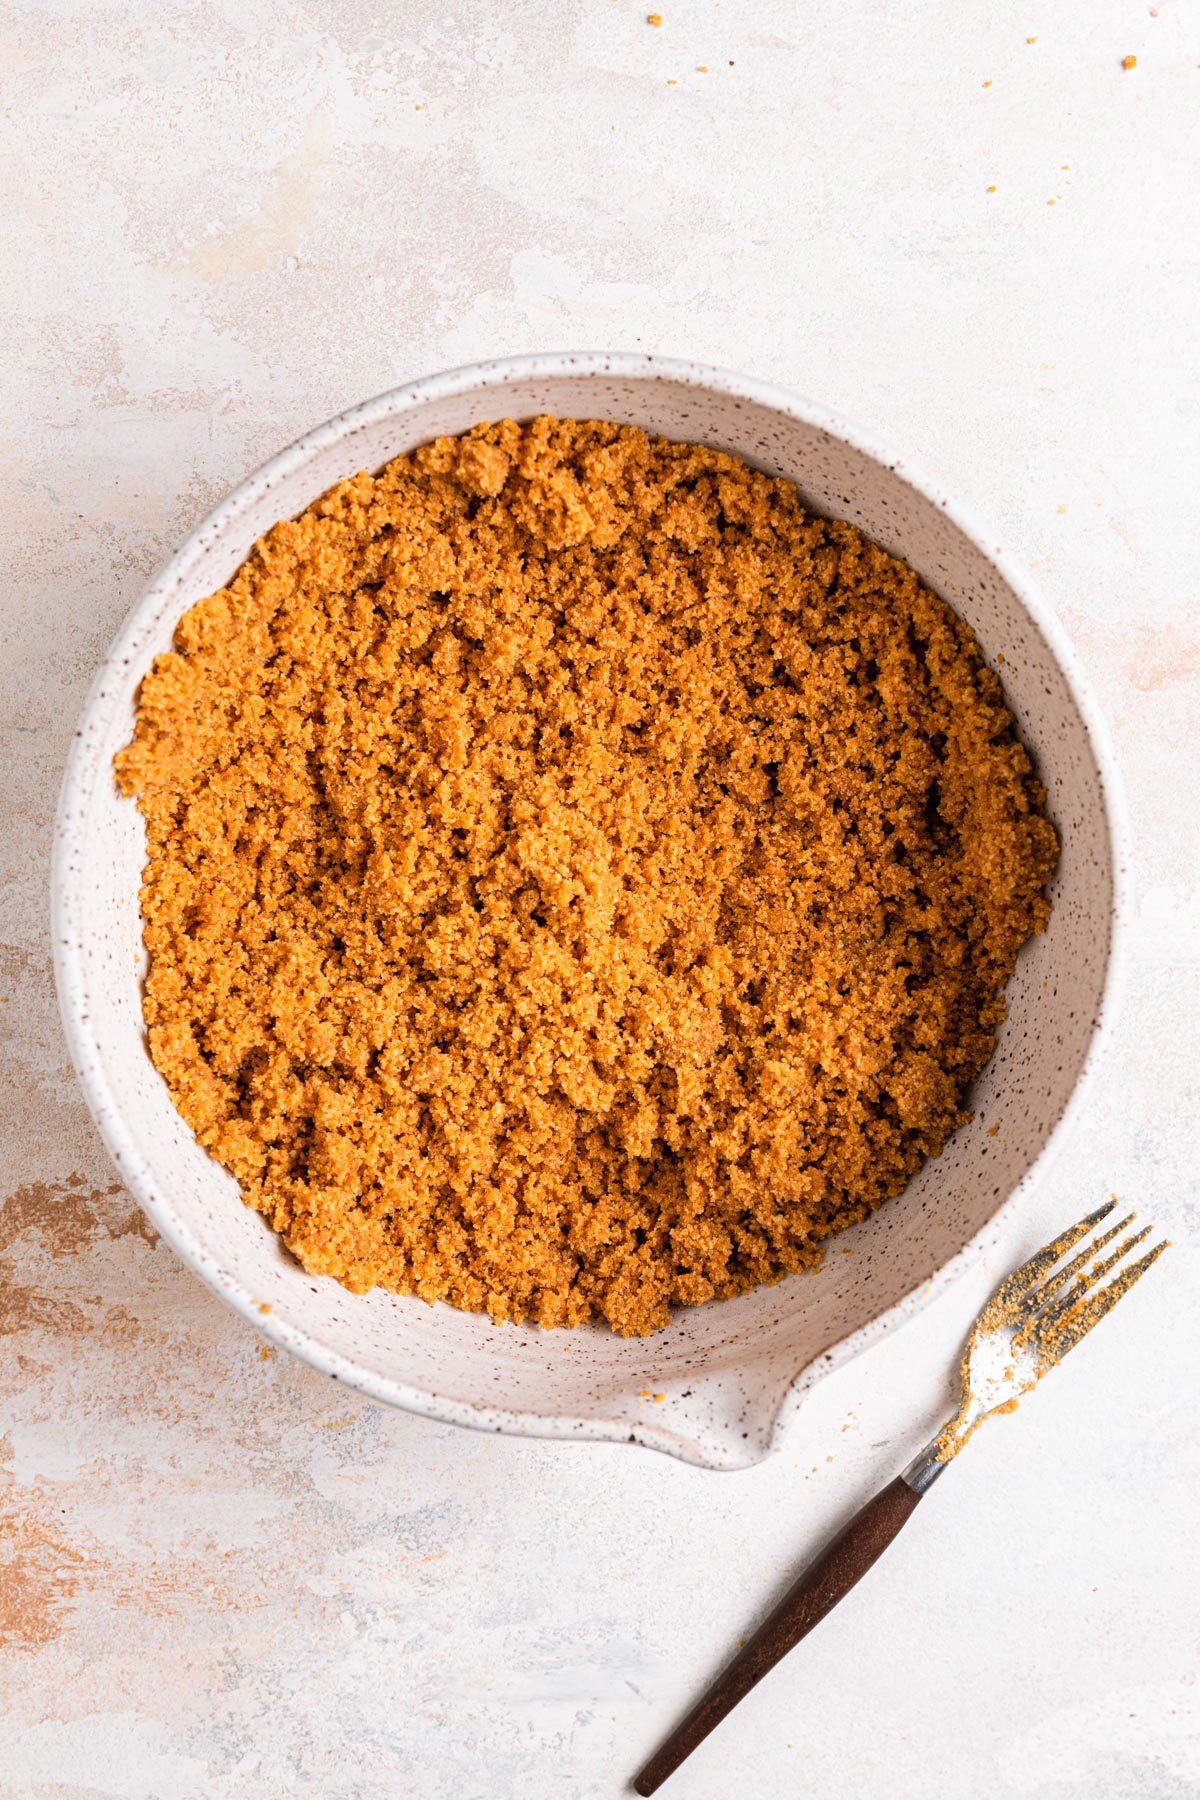 Graham cracker crust stirred together in a mixing bowl.